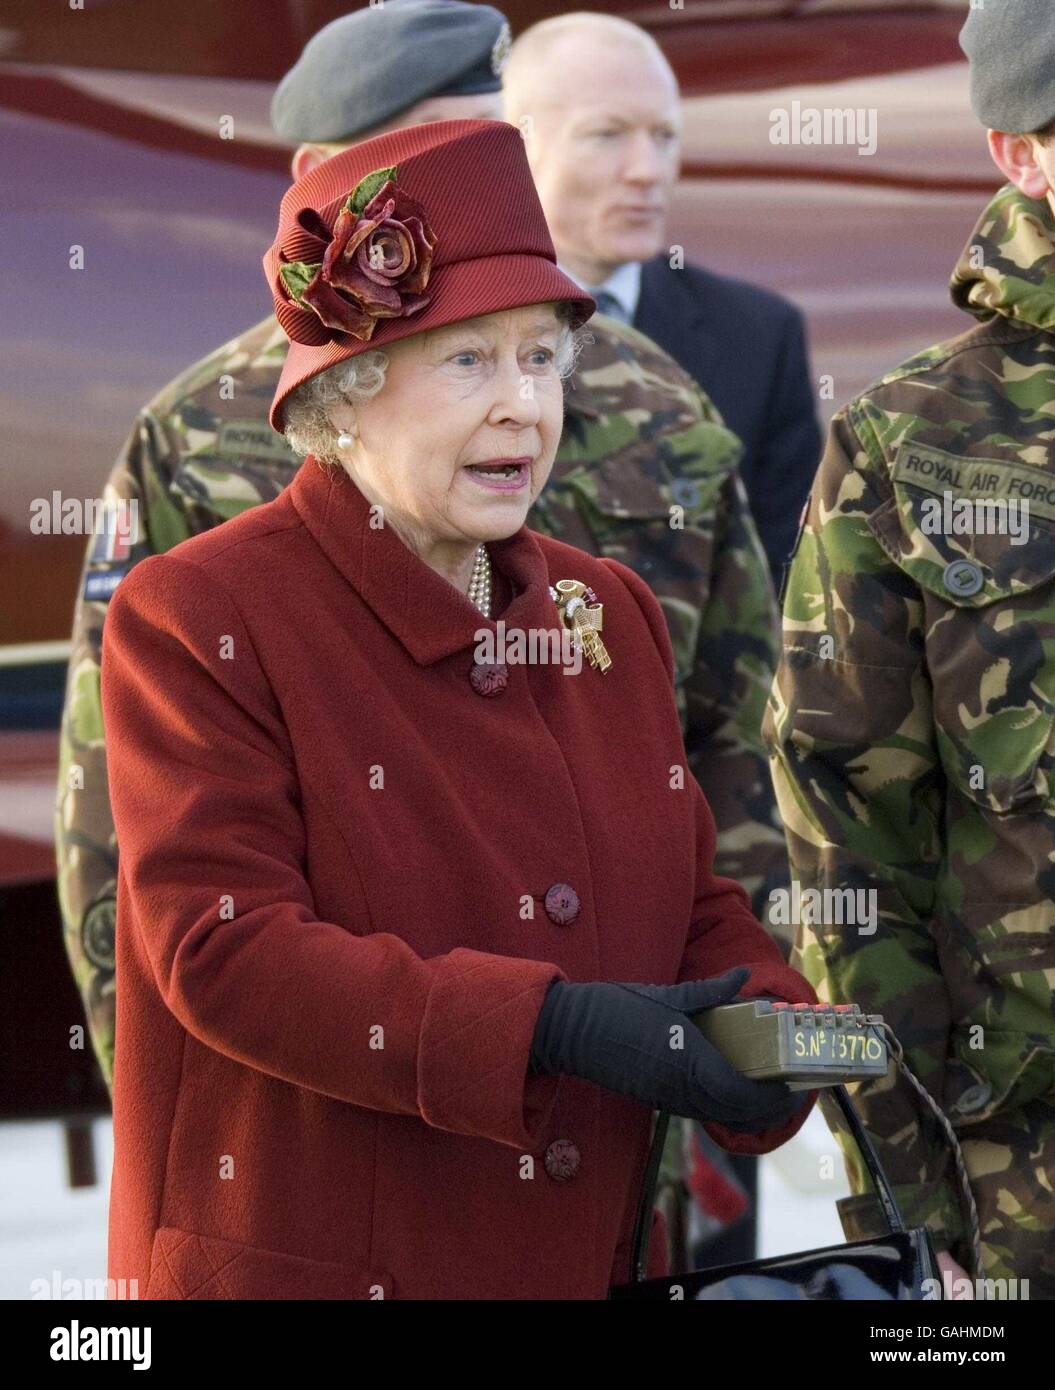 The Queen visits RAF Marham Stock Photo